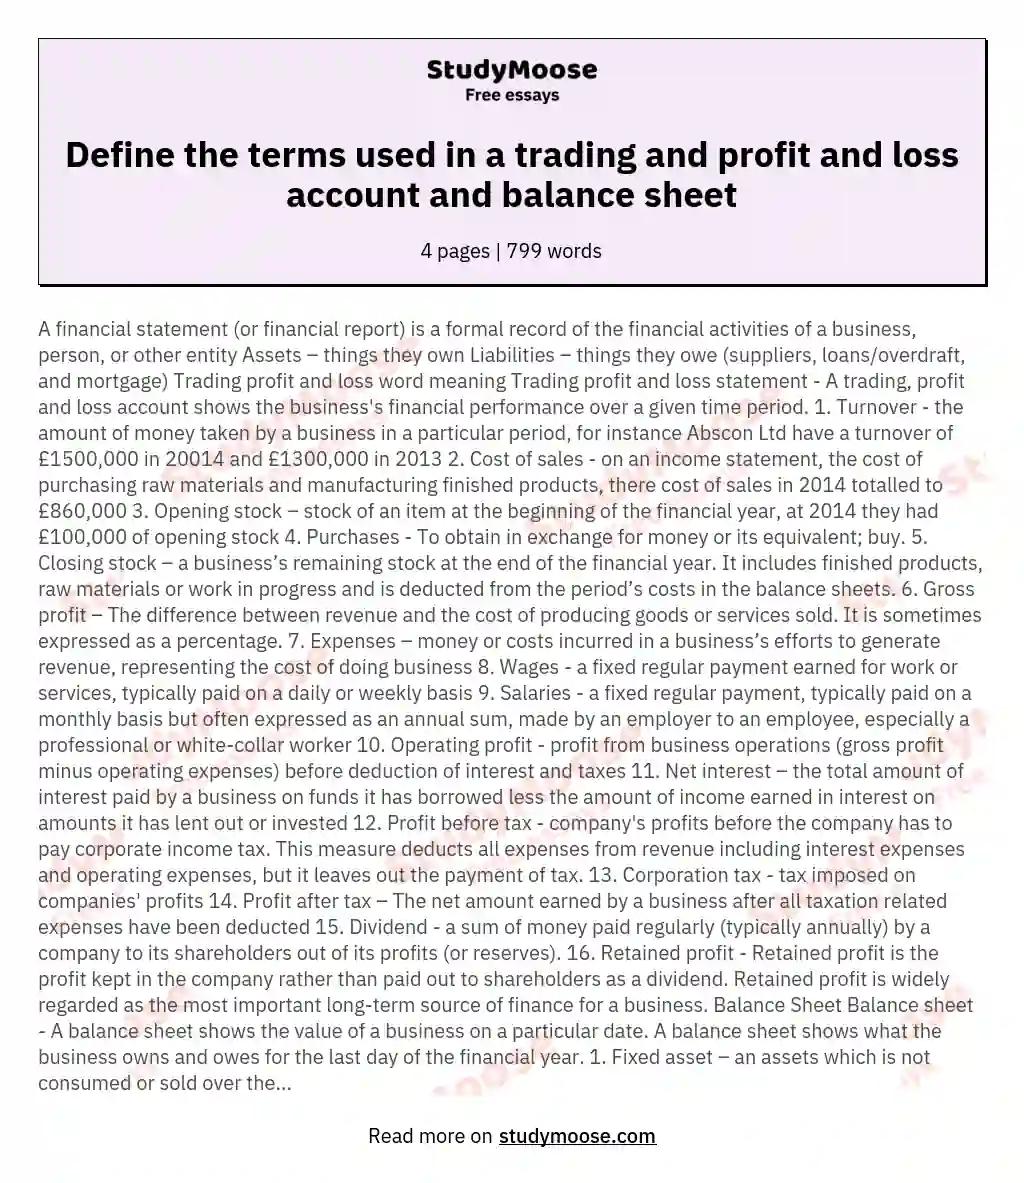 Define the terms used in a trading and profit and loss account and balance sheet